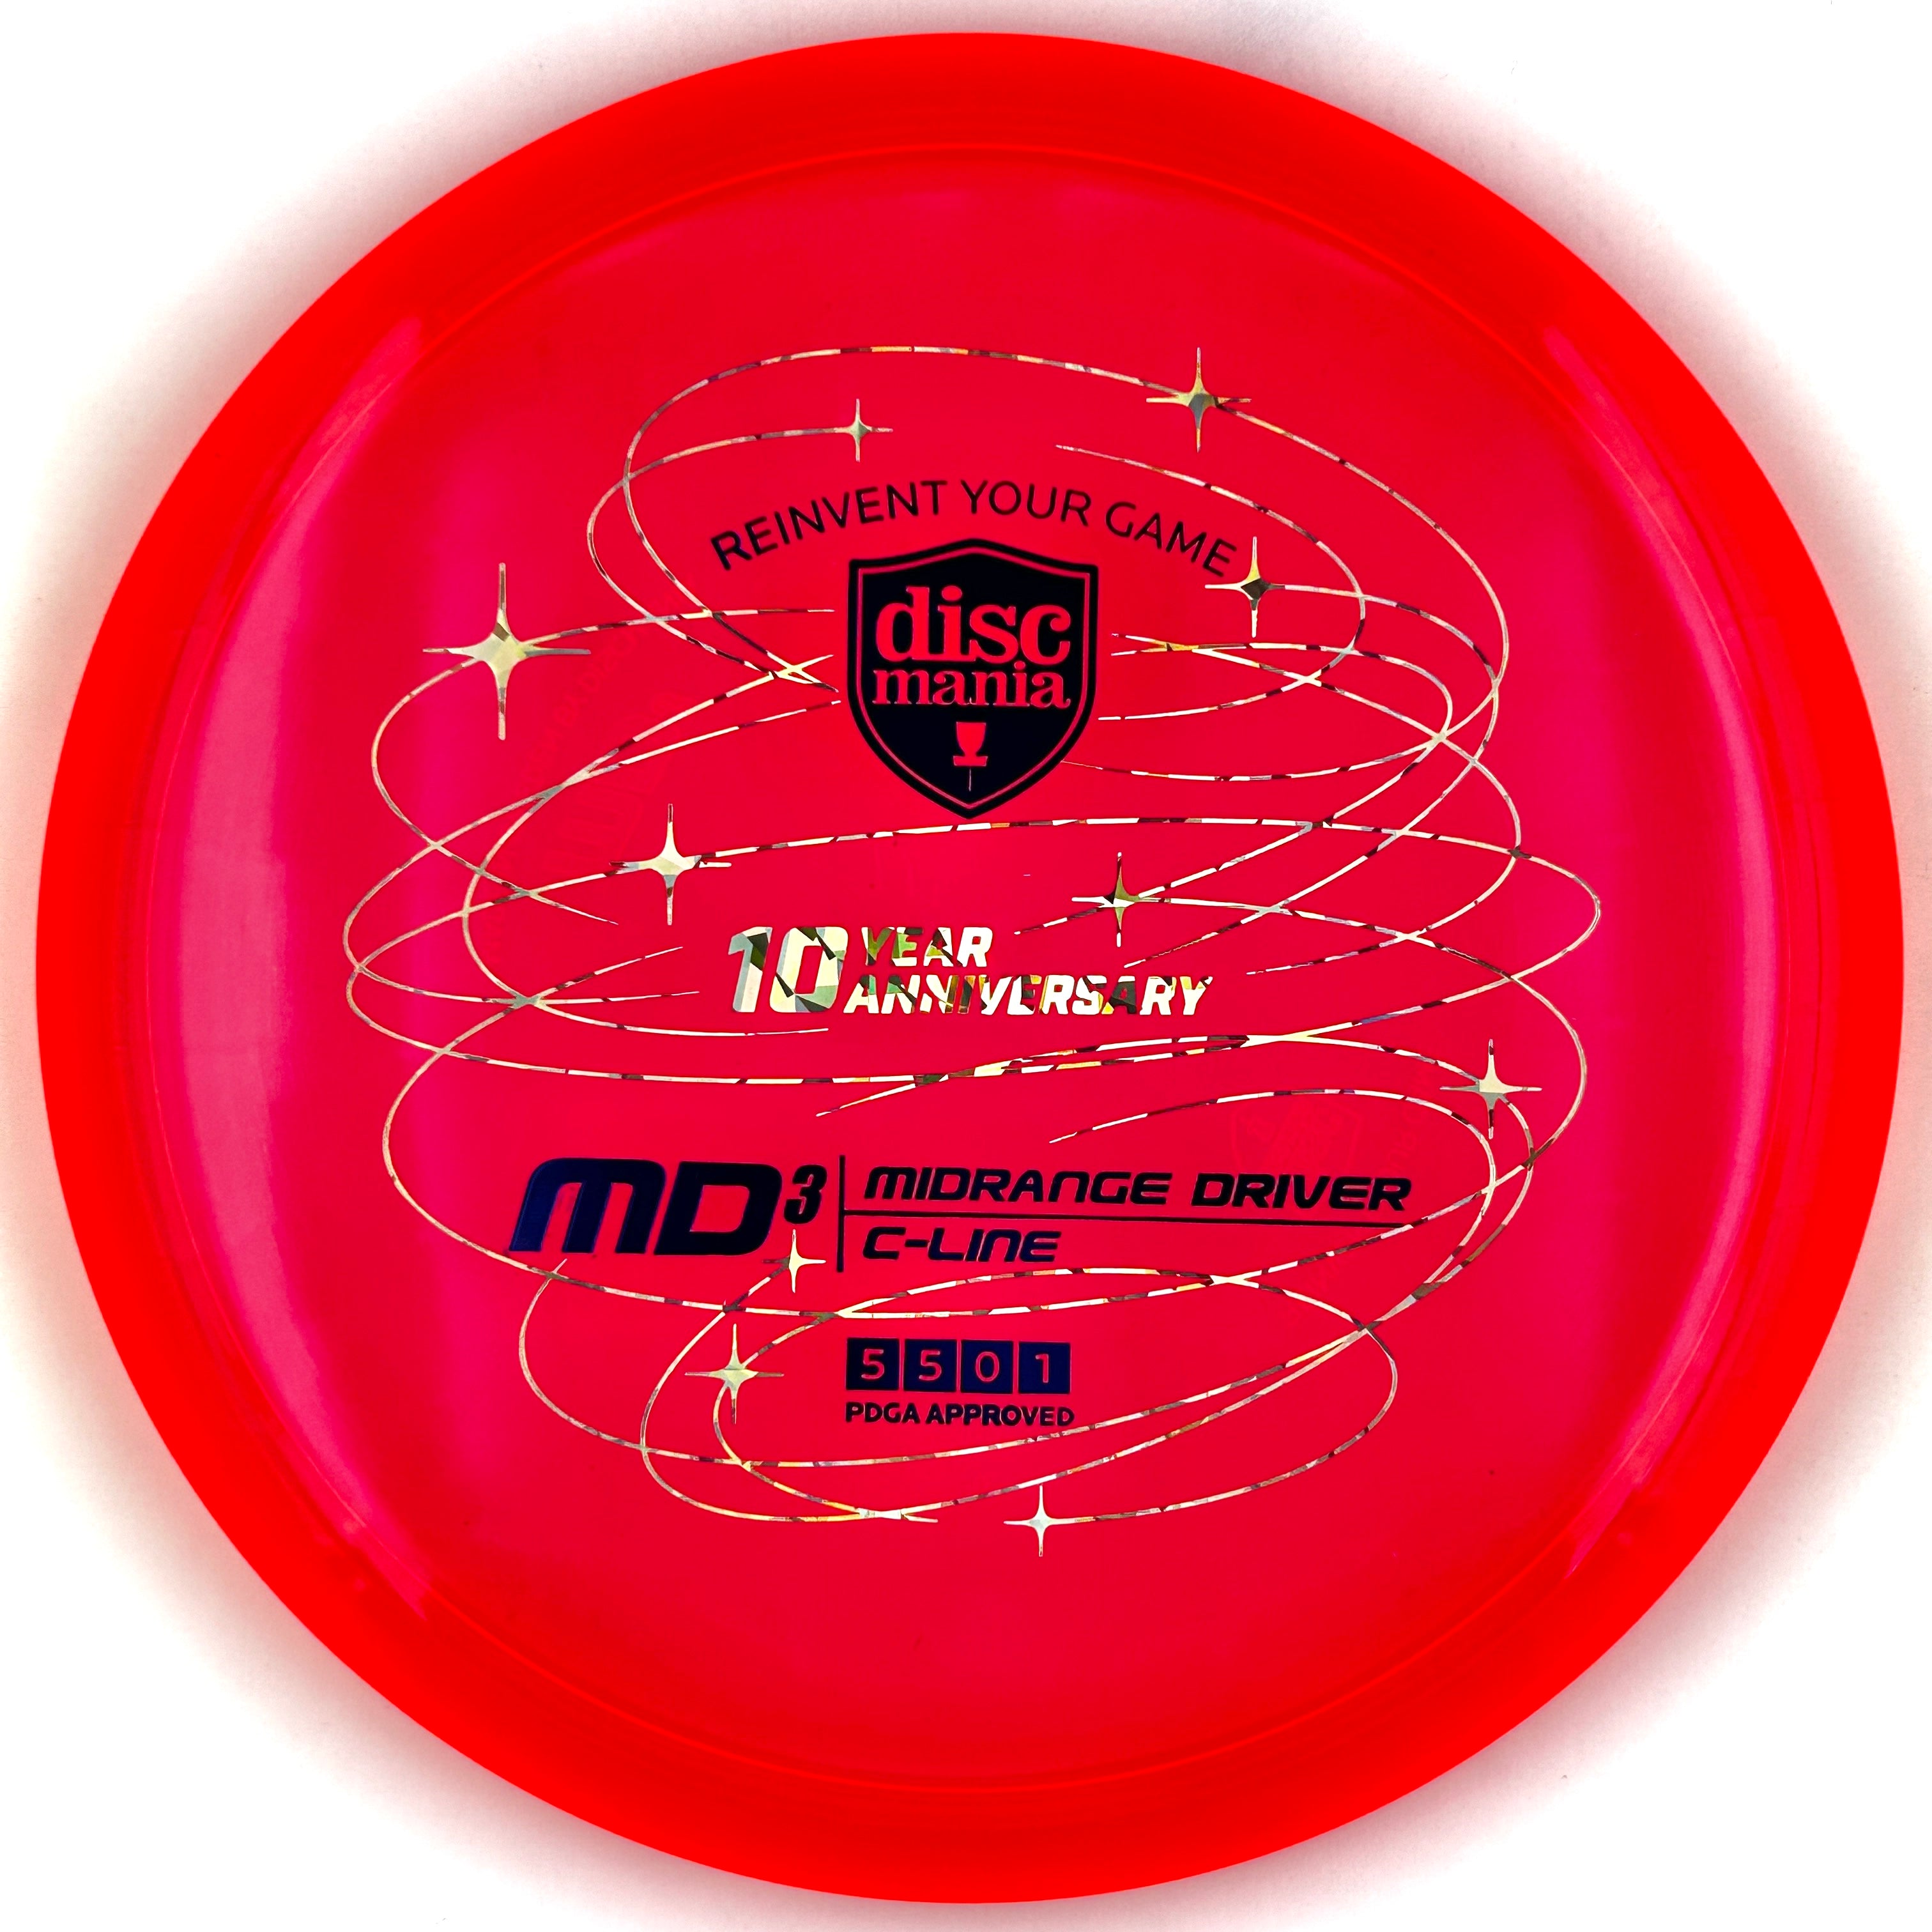 10 Years of the Discmania MD3!